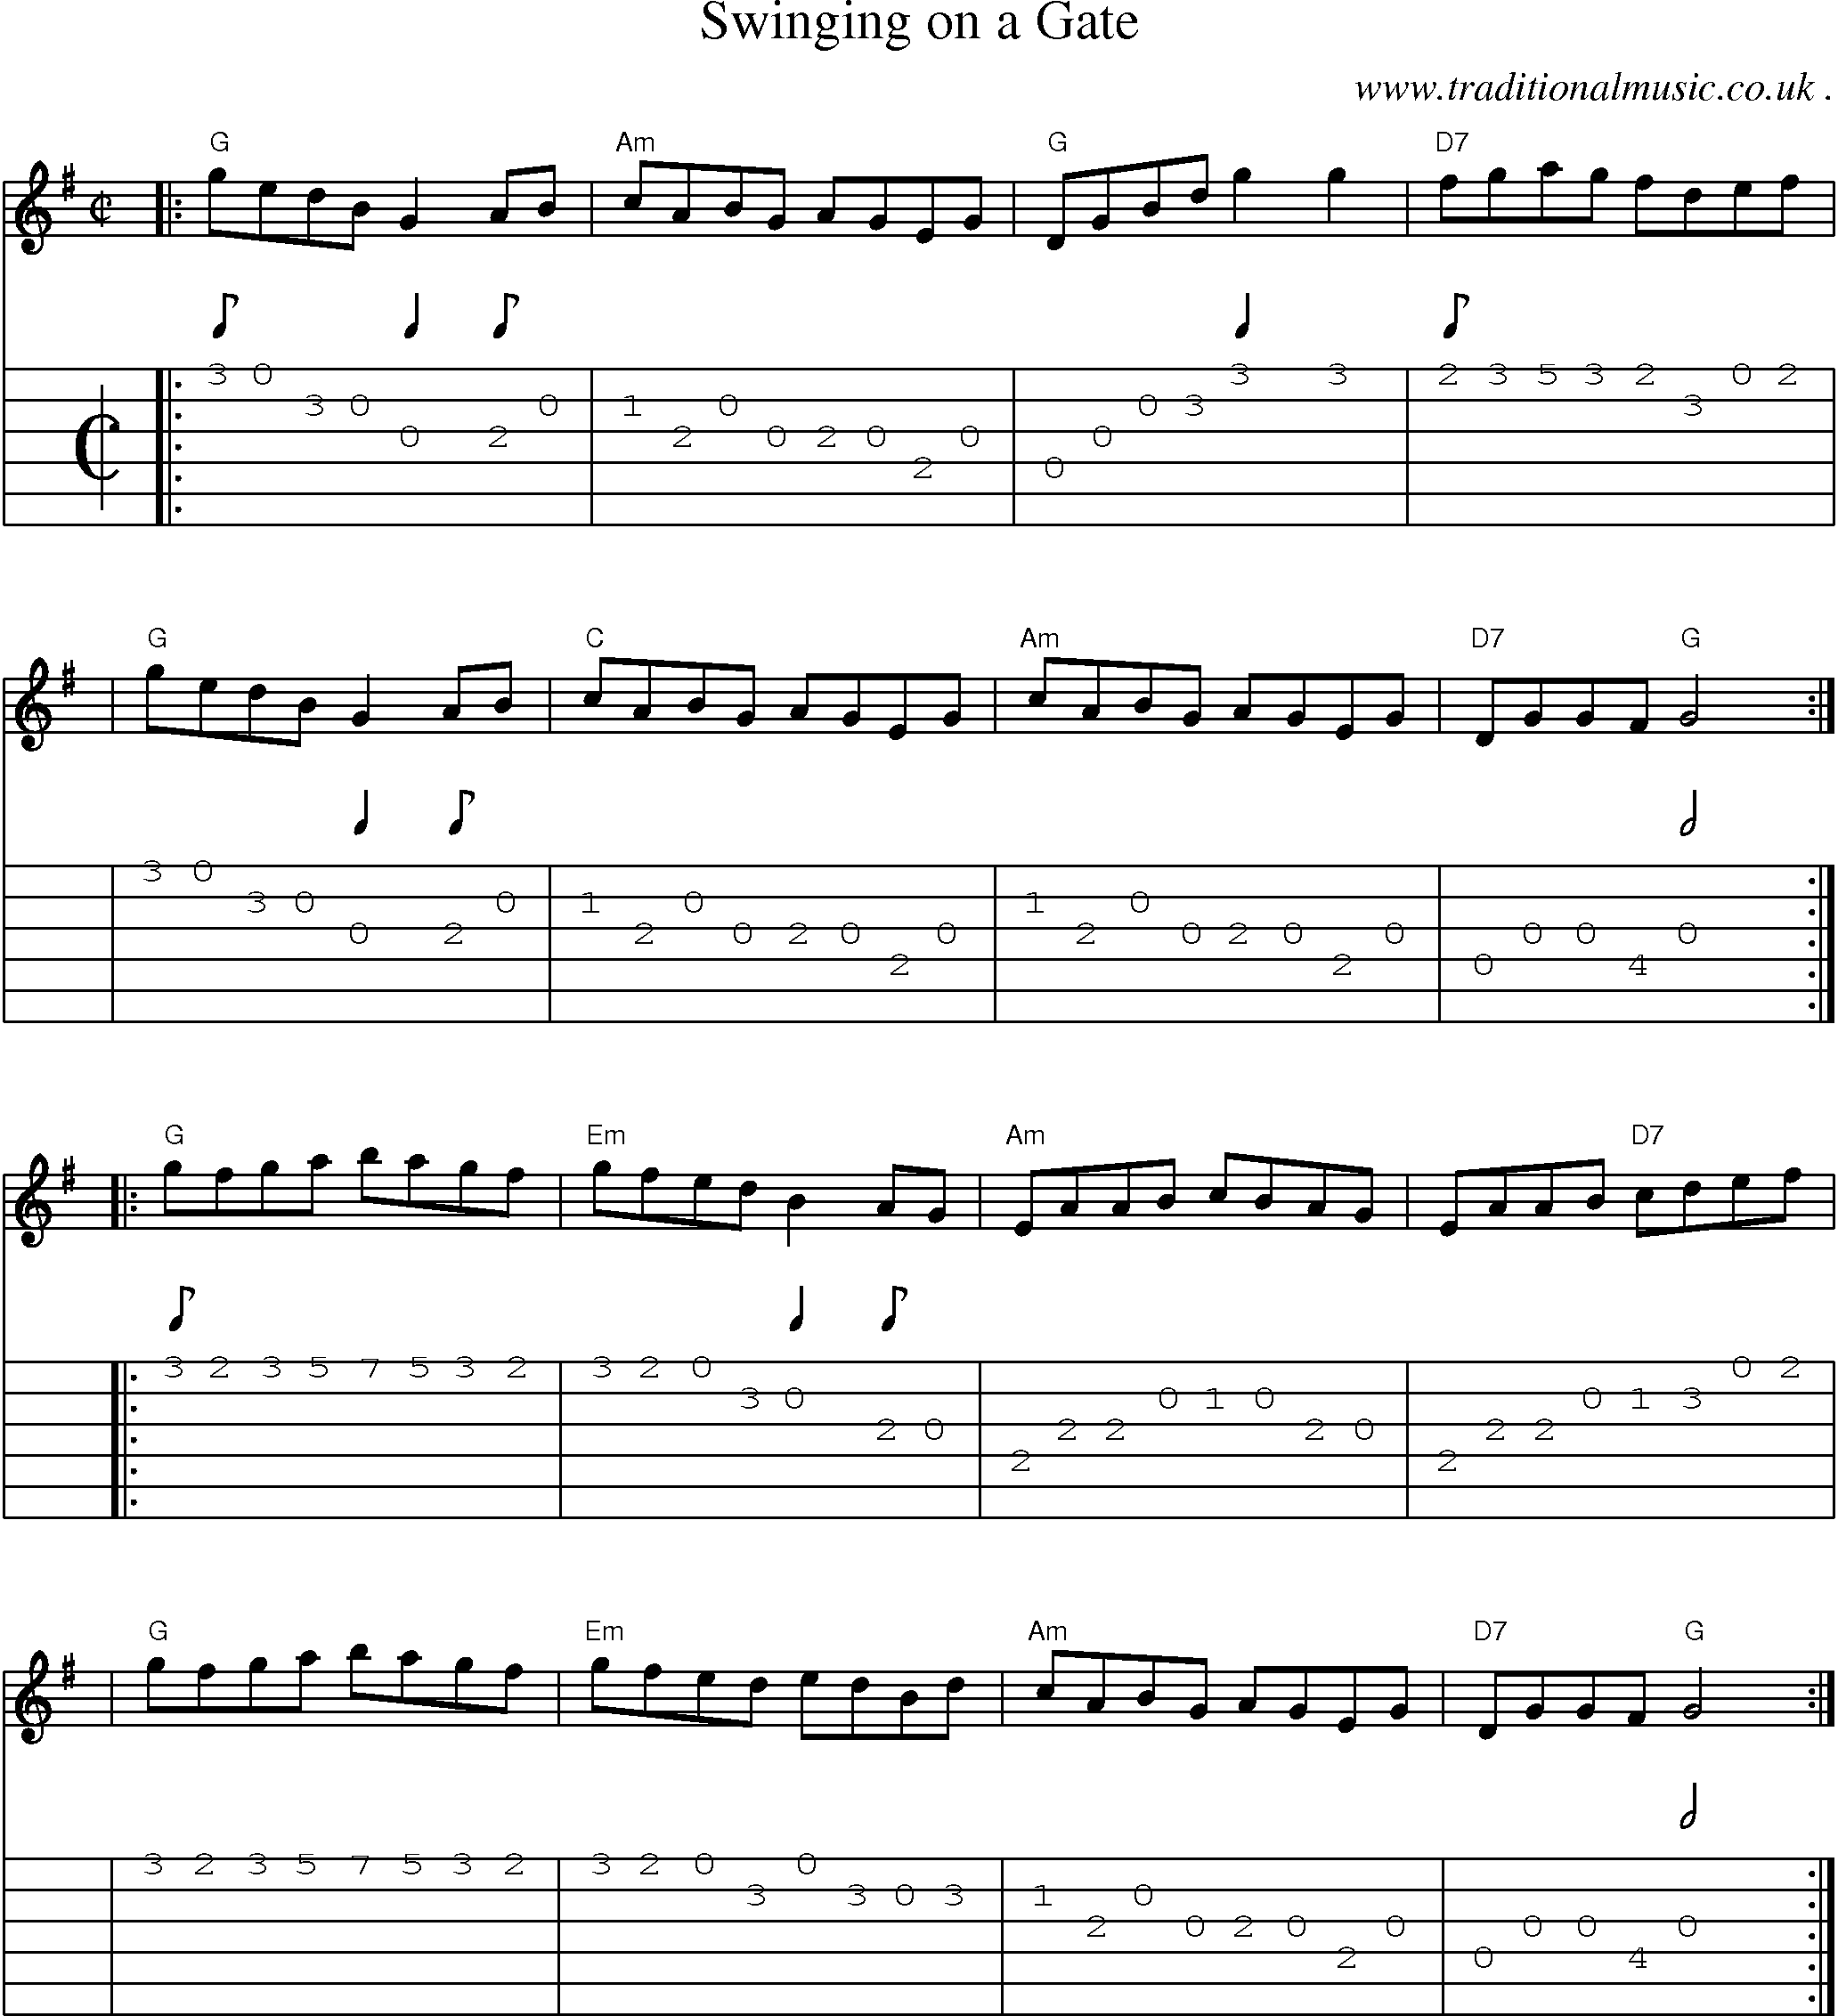 Sheet-music  score, Chords and Guitar Tabs for Swinging On A Gate